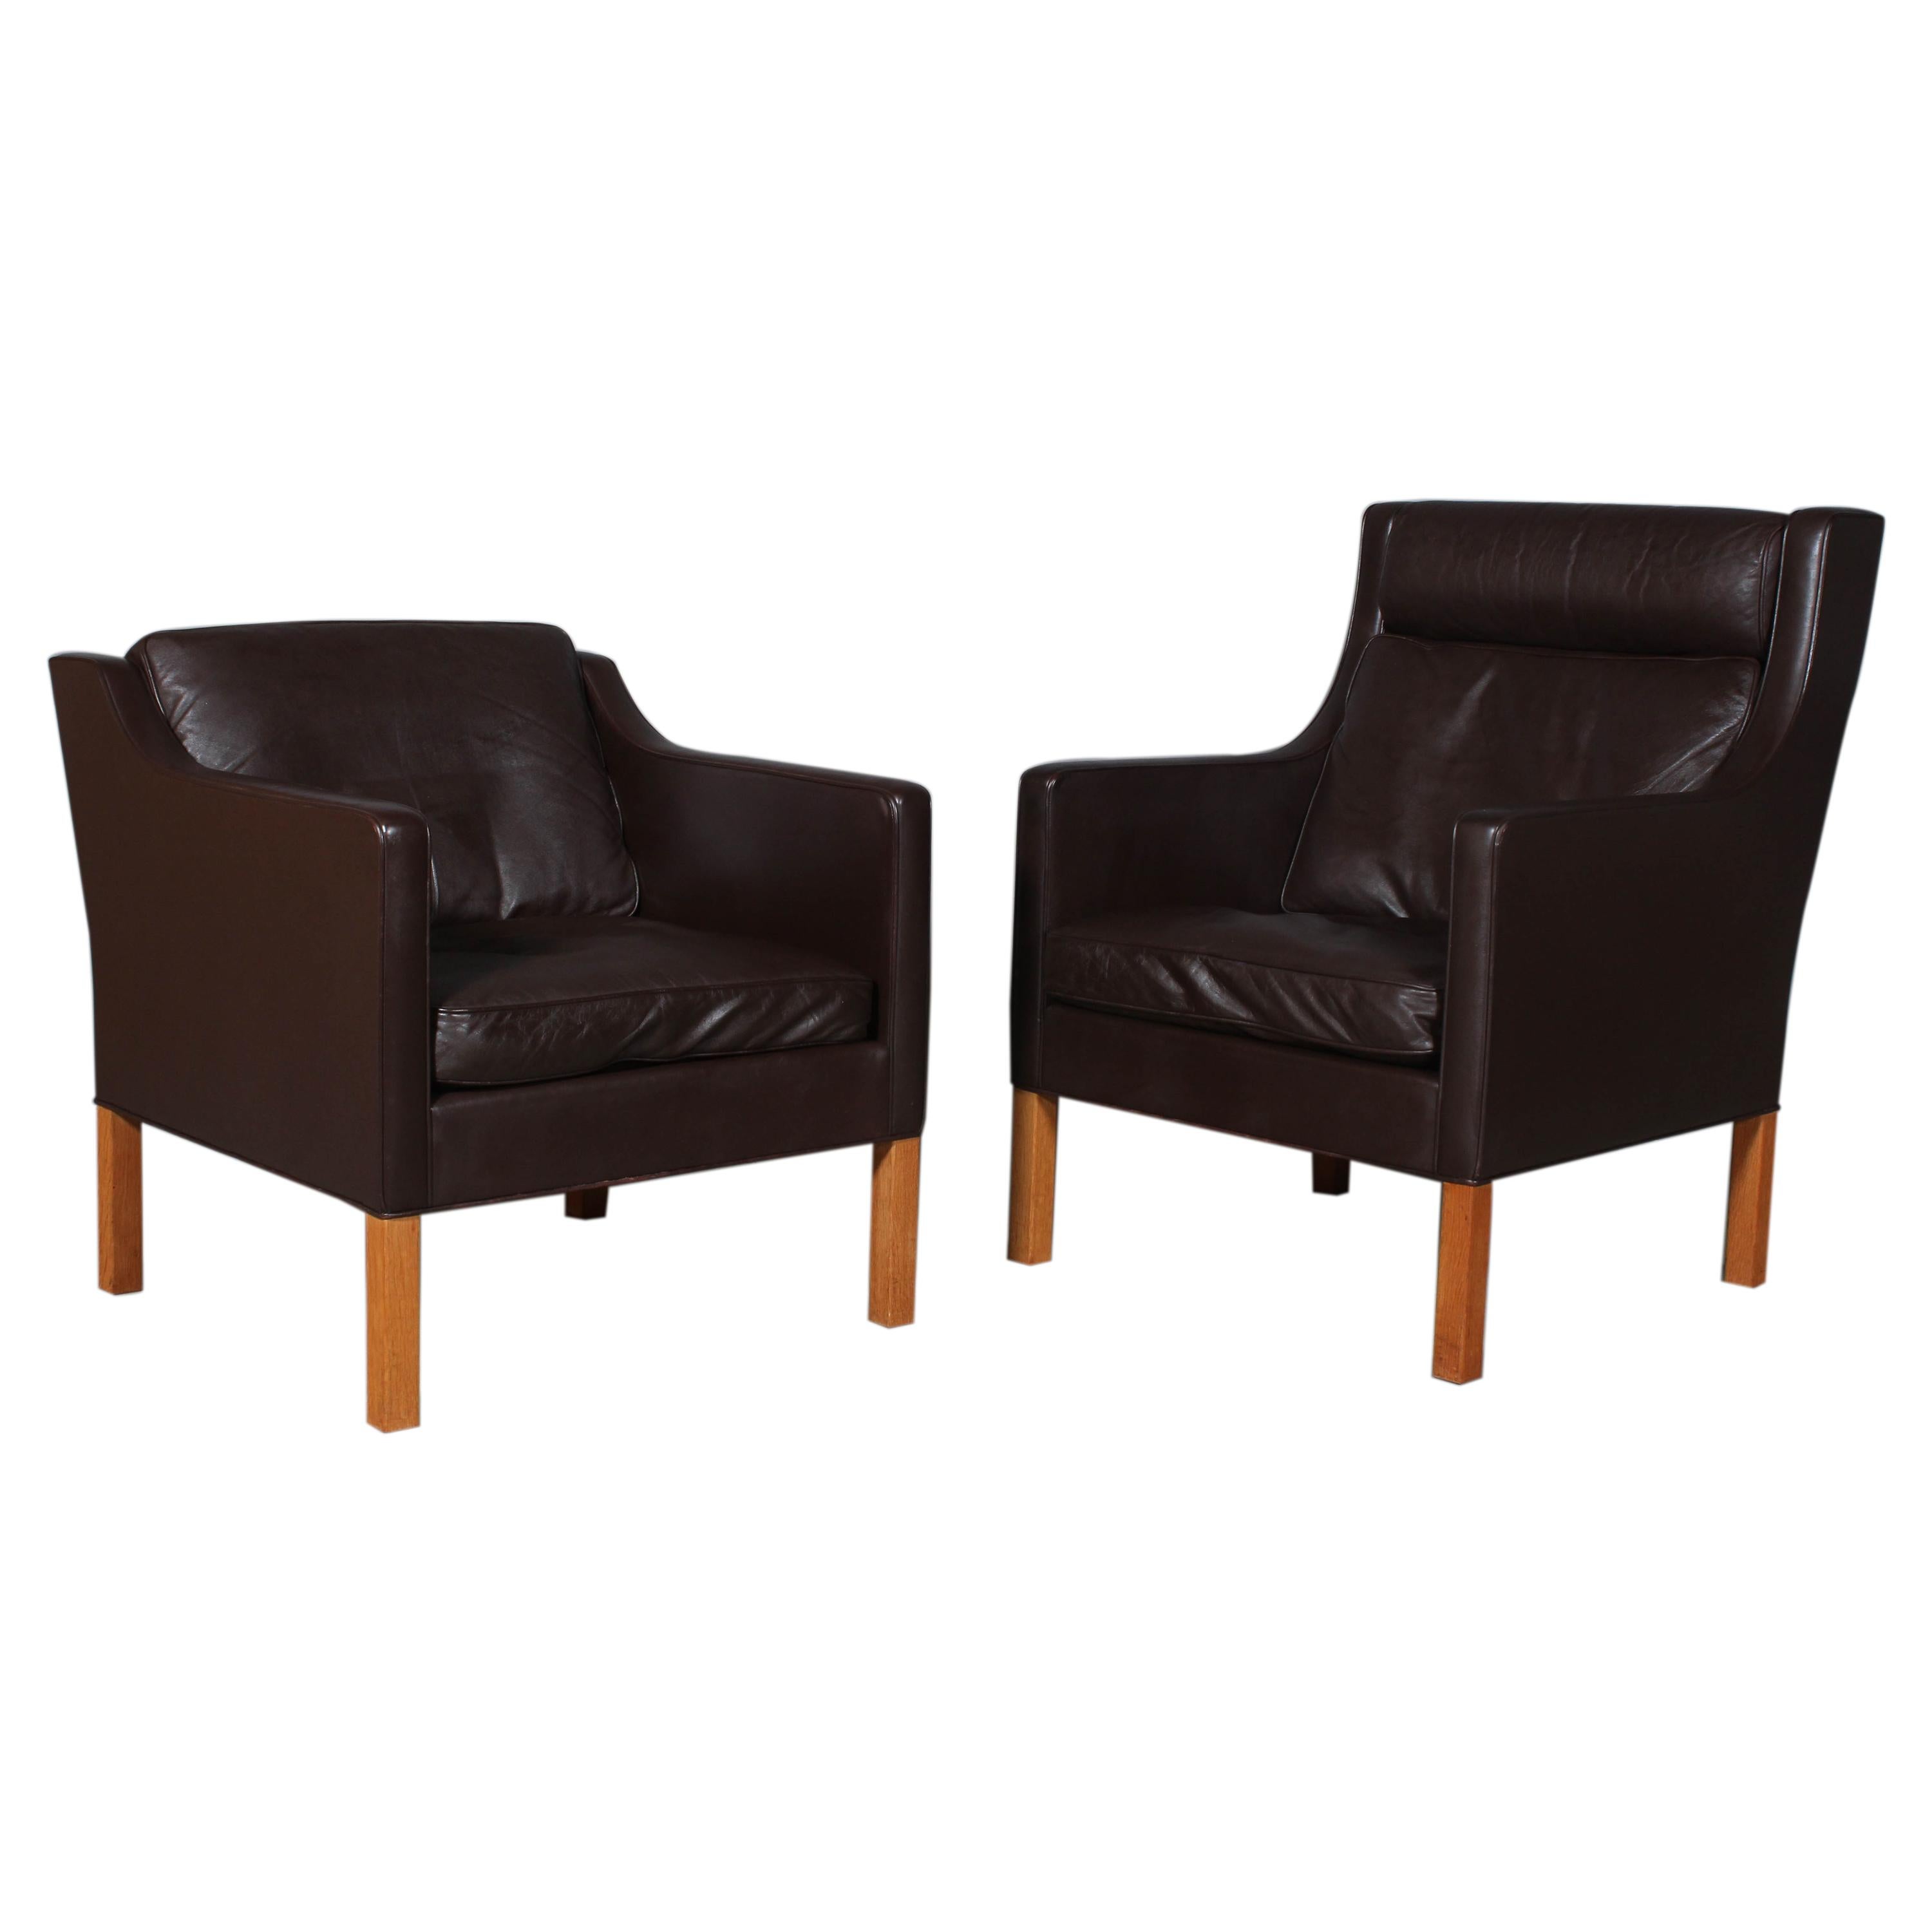 Børge & Peter Mogensen Lounge Chairs in Brown Leather, Model 2431 + 2421